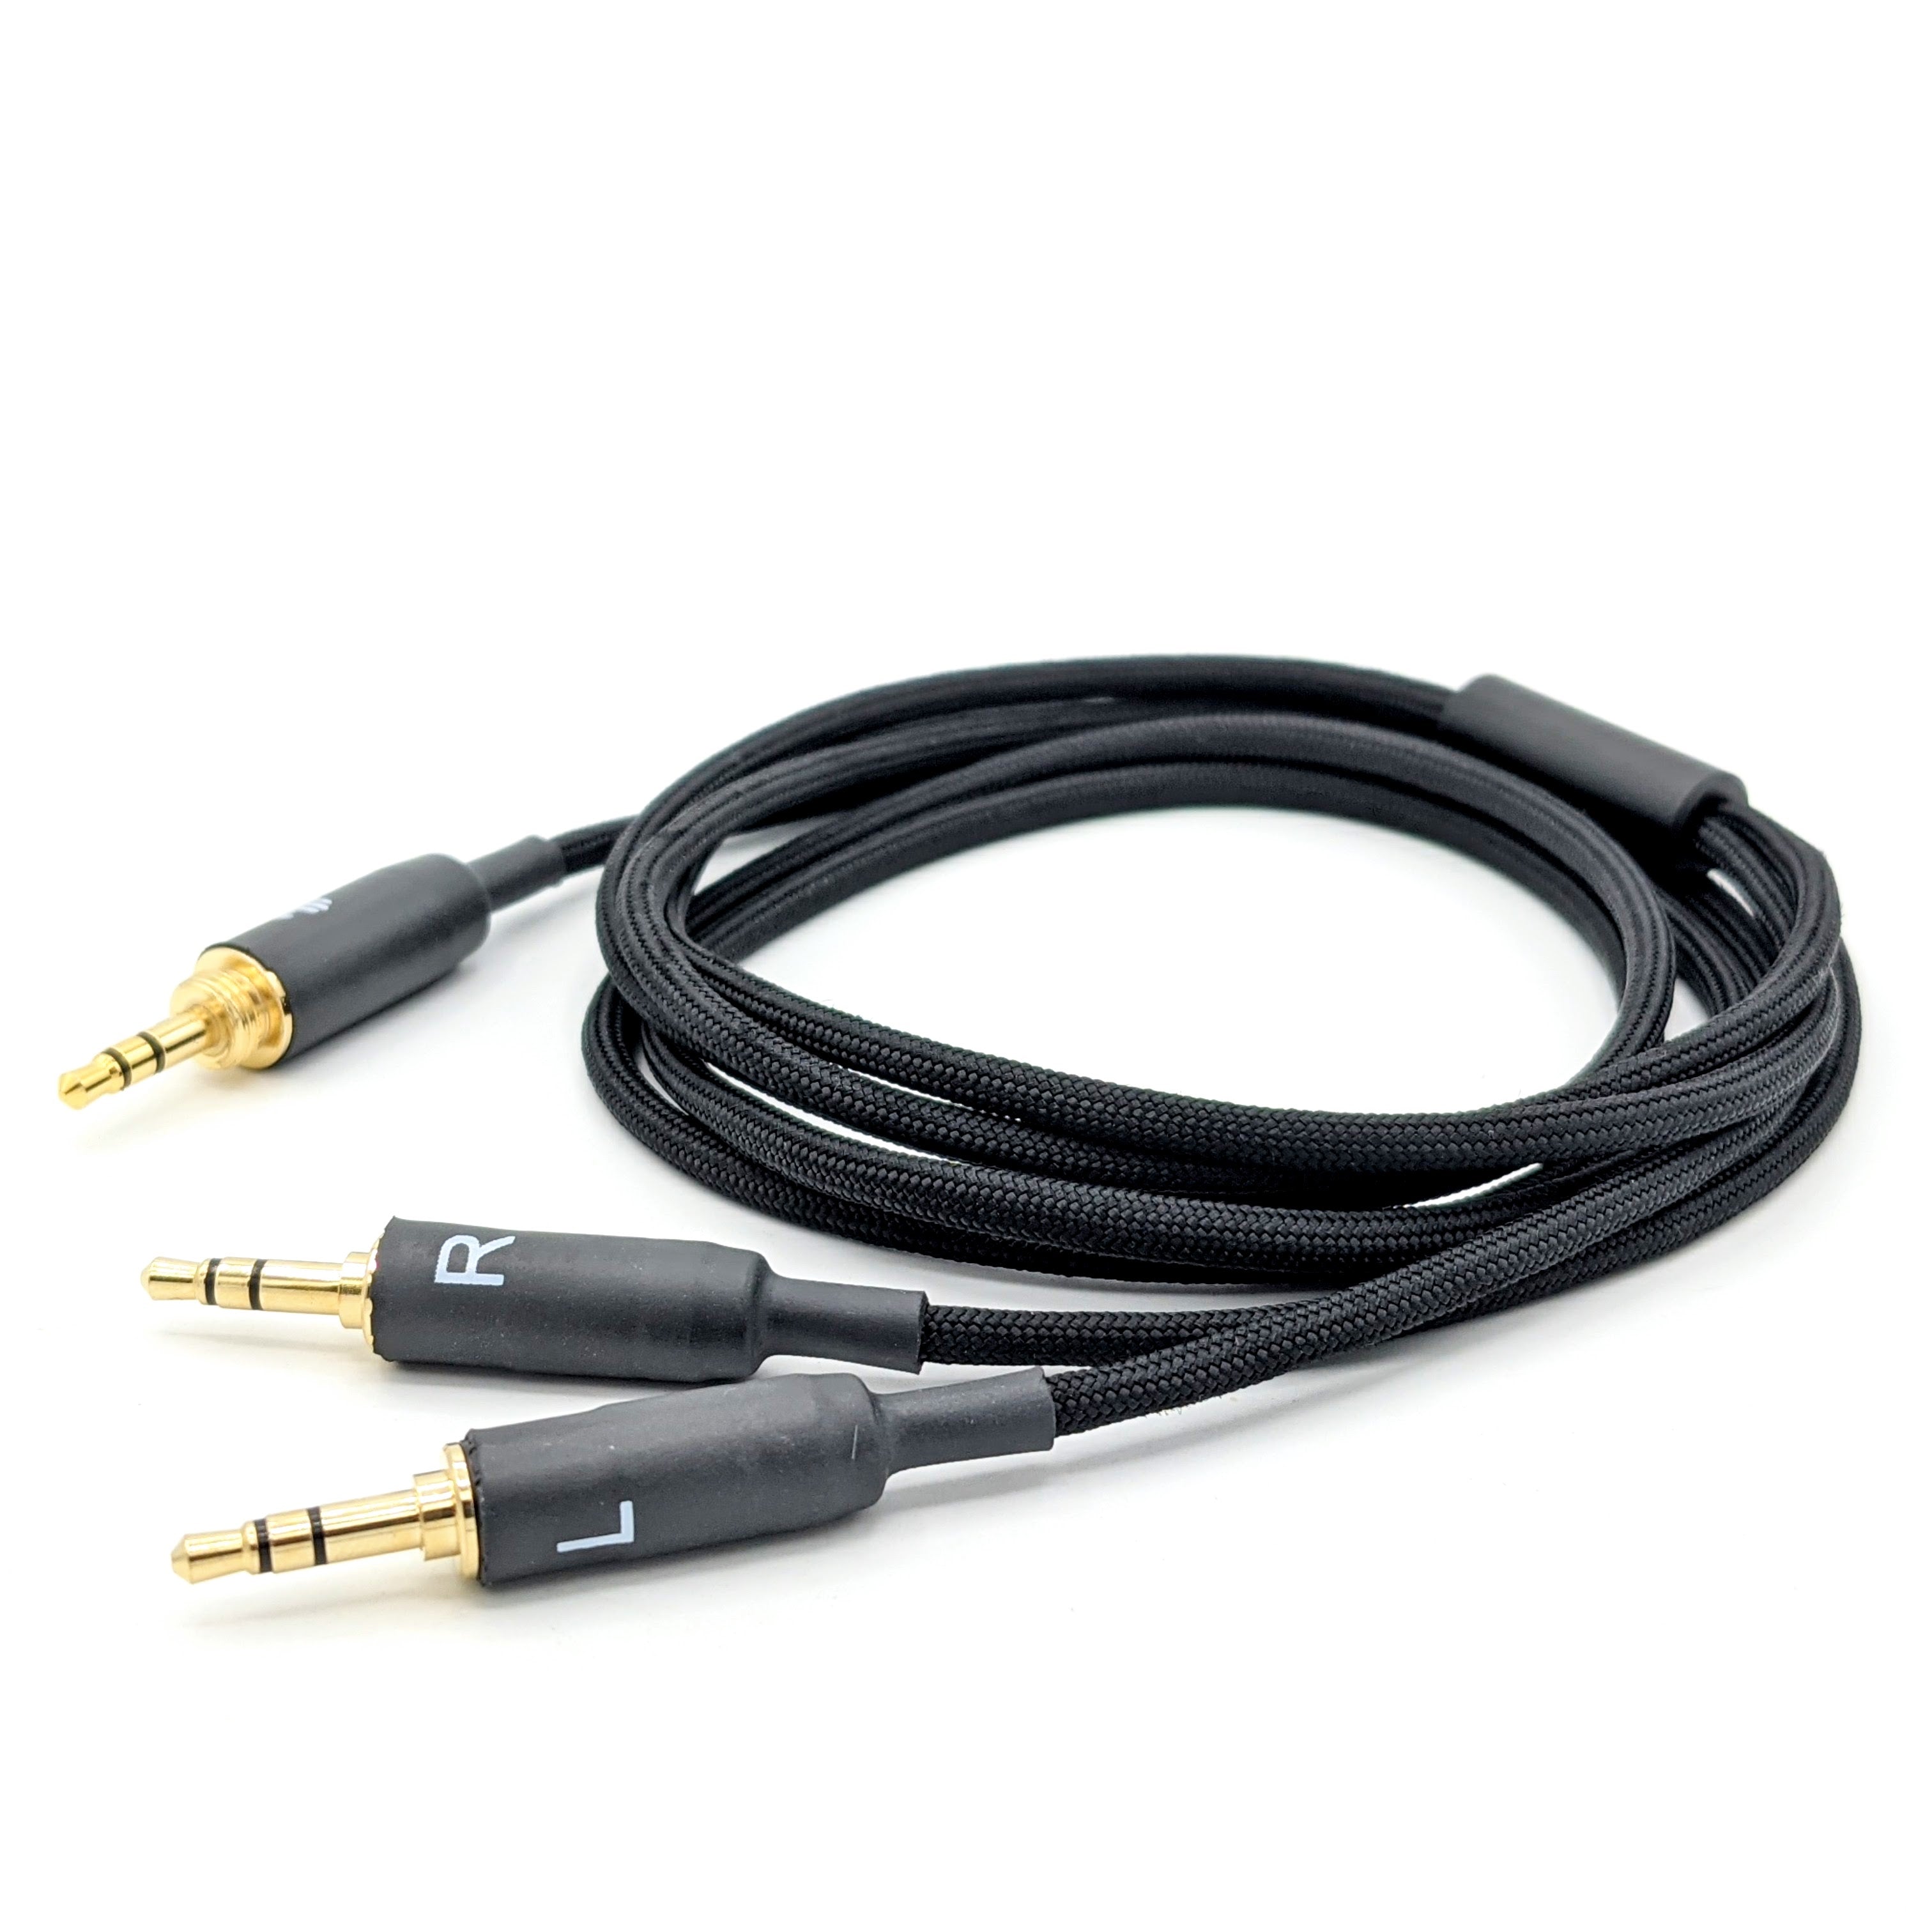 HC-9-THK: Dual 3.5mm TRS Balanced Headphone Cable for Focal and more